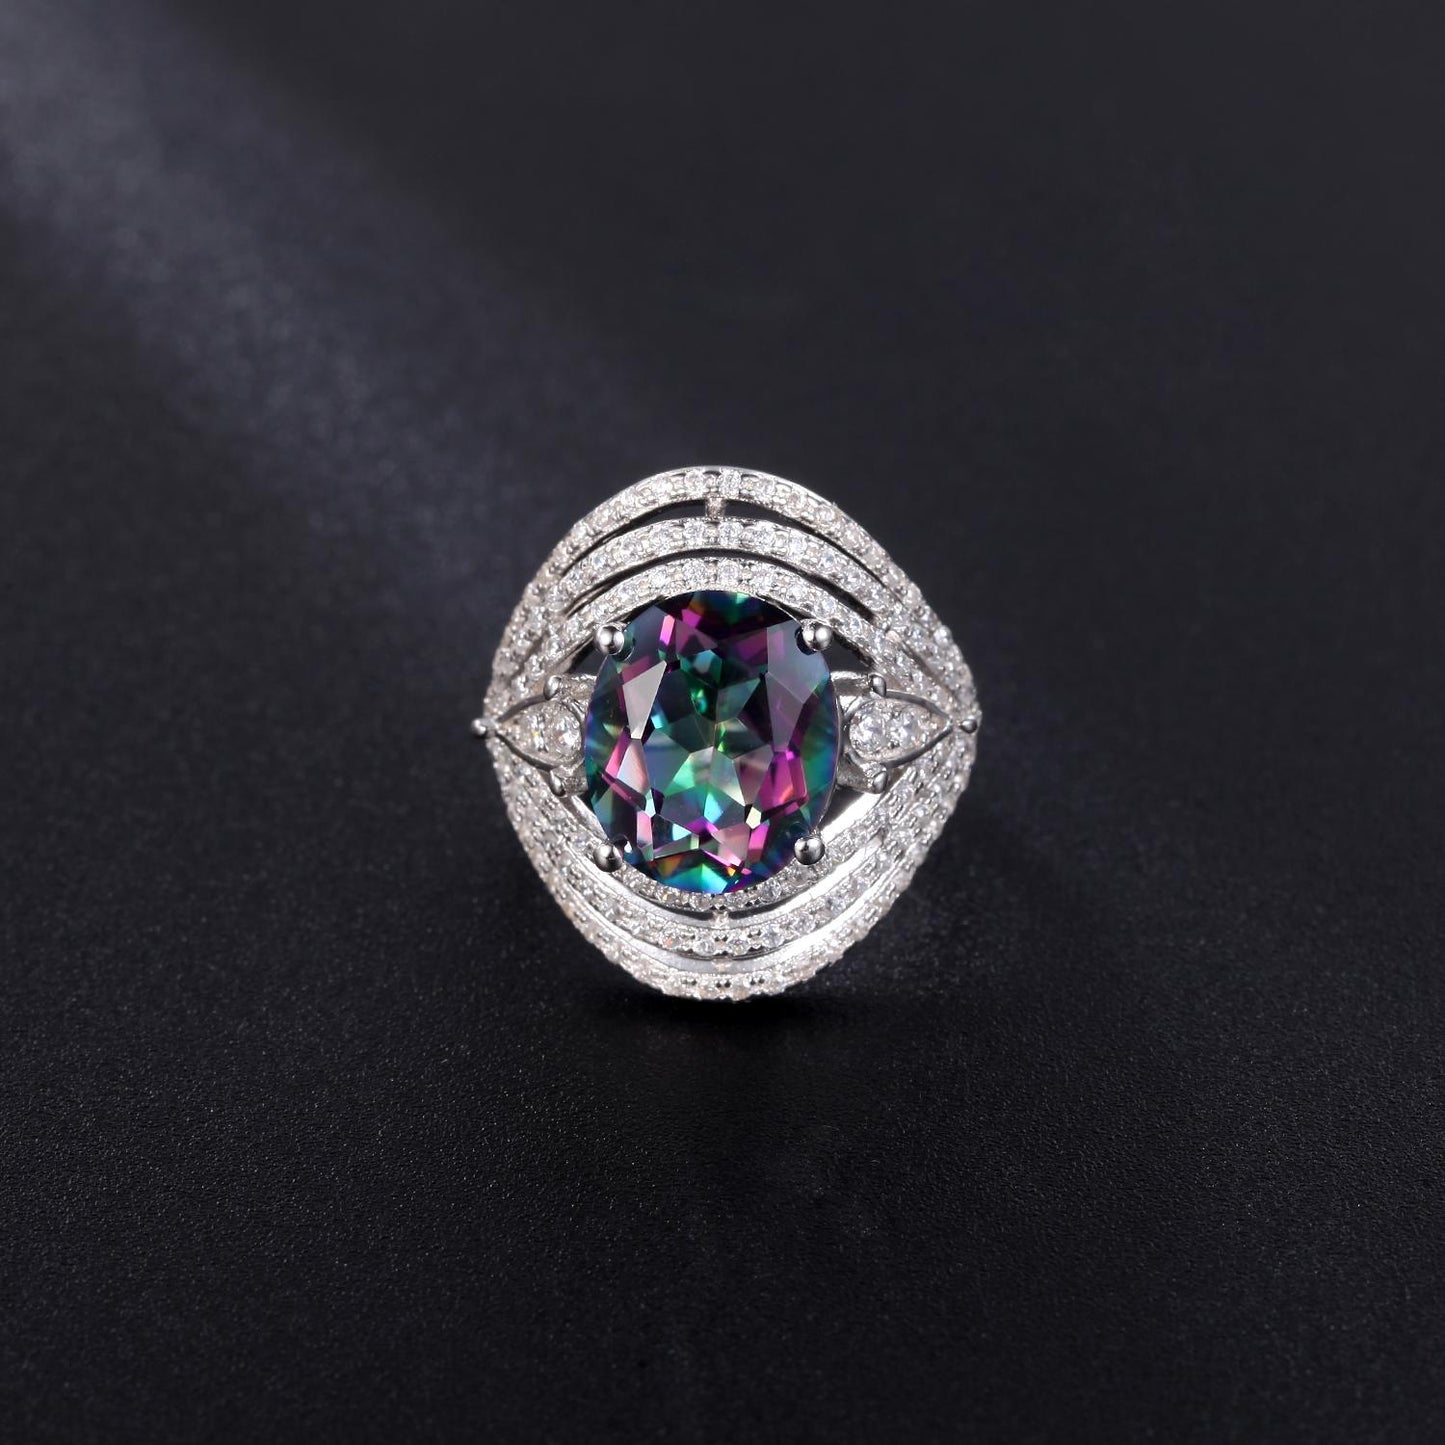 GEM&#39;S BALLET 925 Sterling Silver Gemstone Rings10x12mm Oval Rainbow Mystic Topaz Vintage Cocktail Ring For Women Fine Jewelry